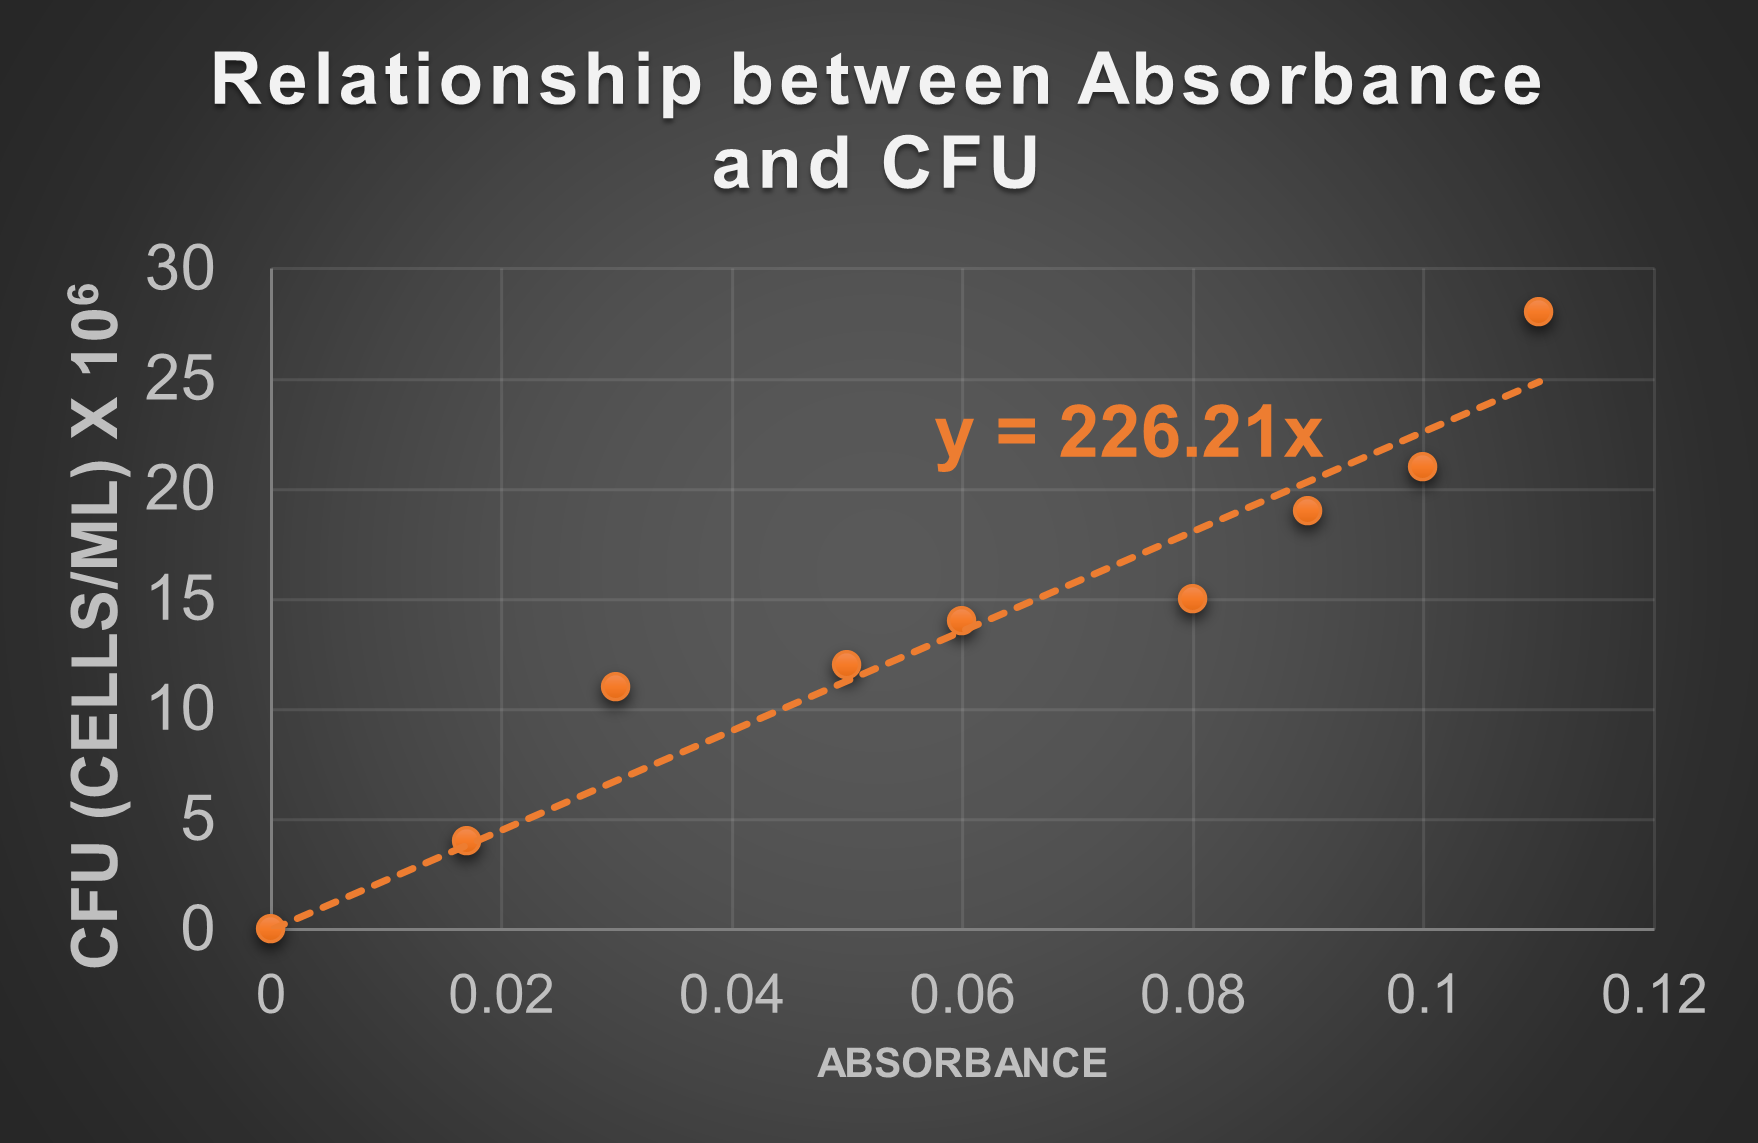 Relationship between Absorbance and CFU